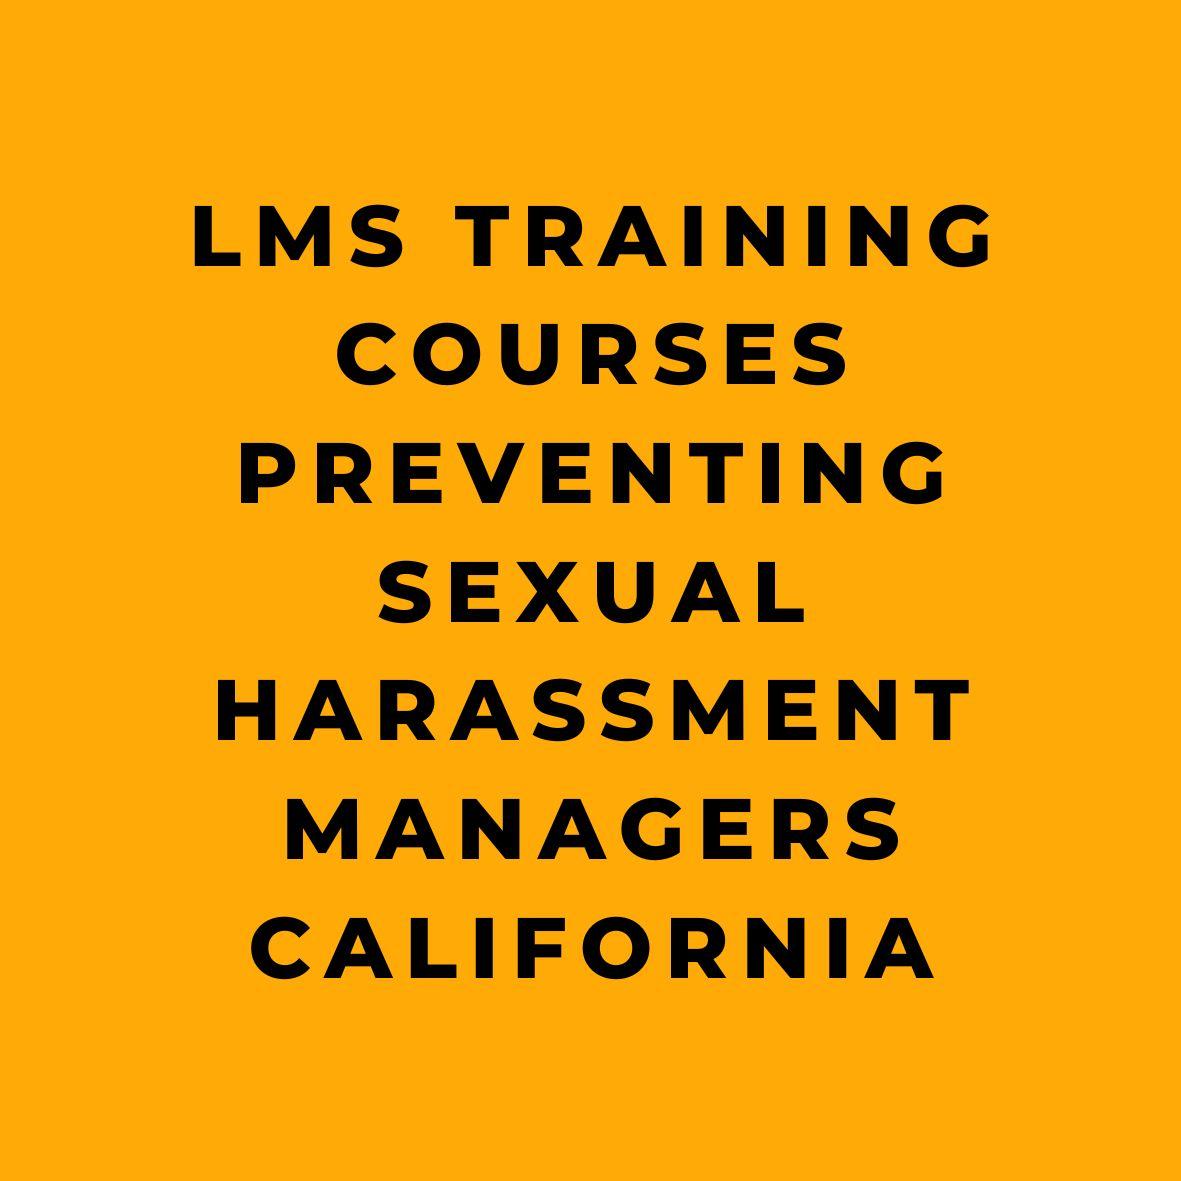 LMS Training Courses Preventing Sexual Harassment Managers California